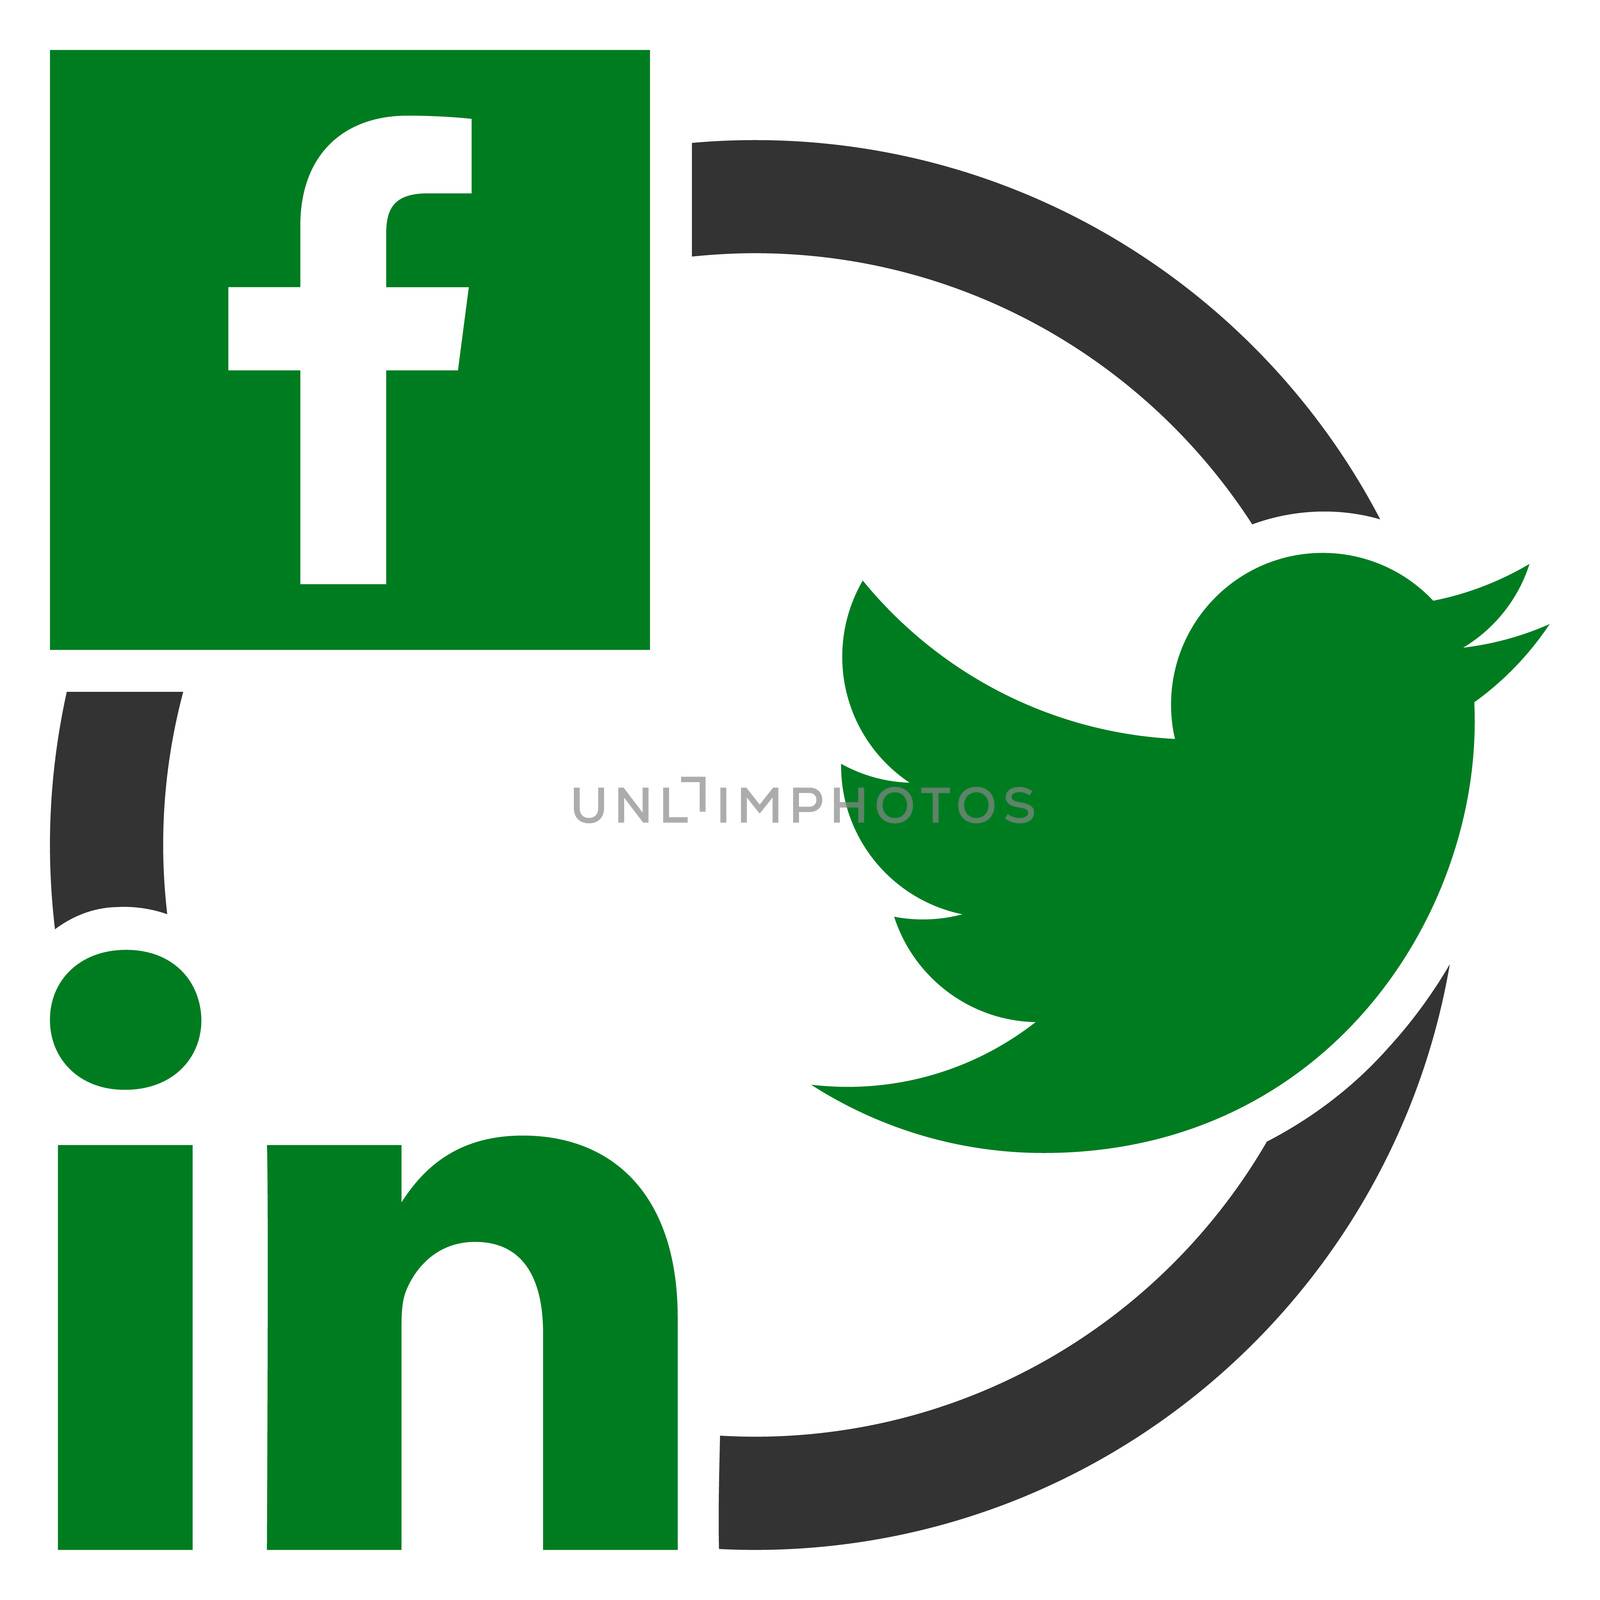 Social Networks Icon. This flat glyph symbol uses green and gray colors, and isolated on a white background.